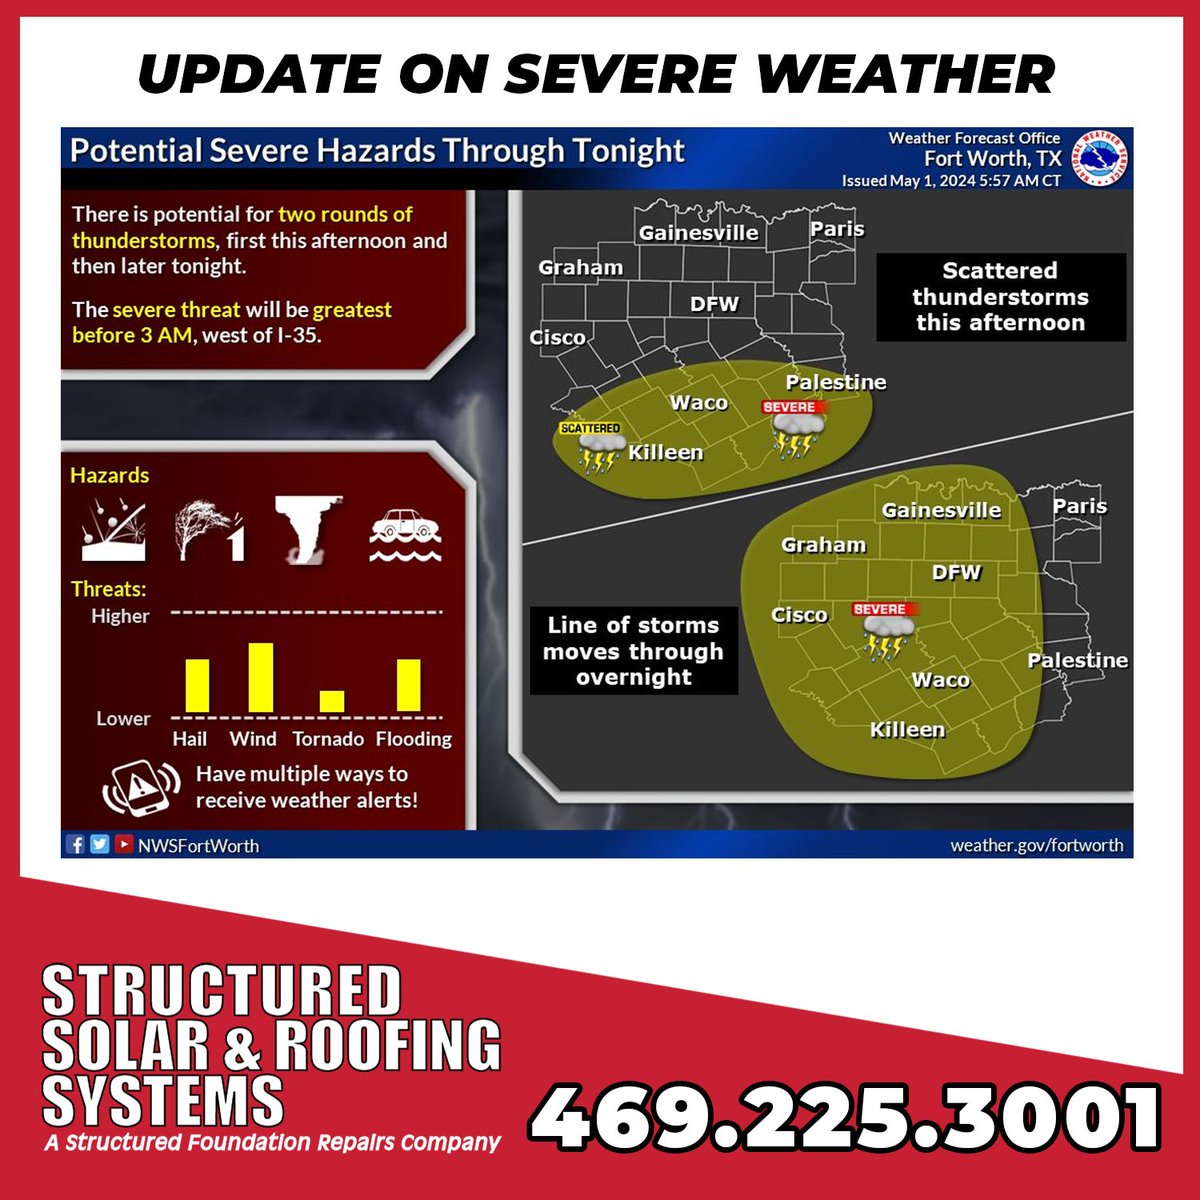 The timing for folks in our service area looks to be between midnight tonight and 3 am with the main threats being high wind and hail. If you discover your roof needs some TLC in the morning, call us! 469.225.3001

#severeweather #northtexas #dfw #roofdamage #roofrepair